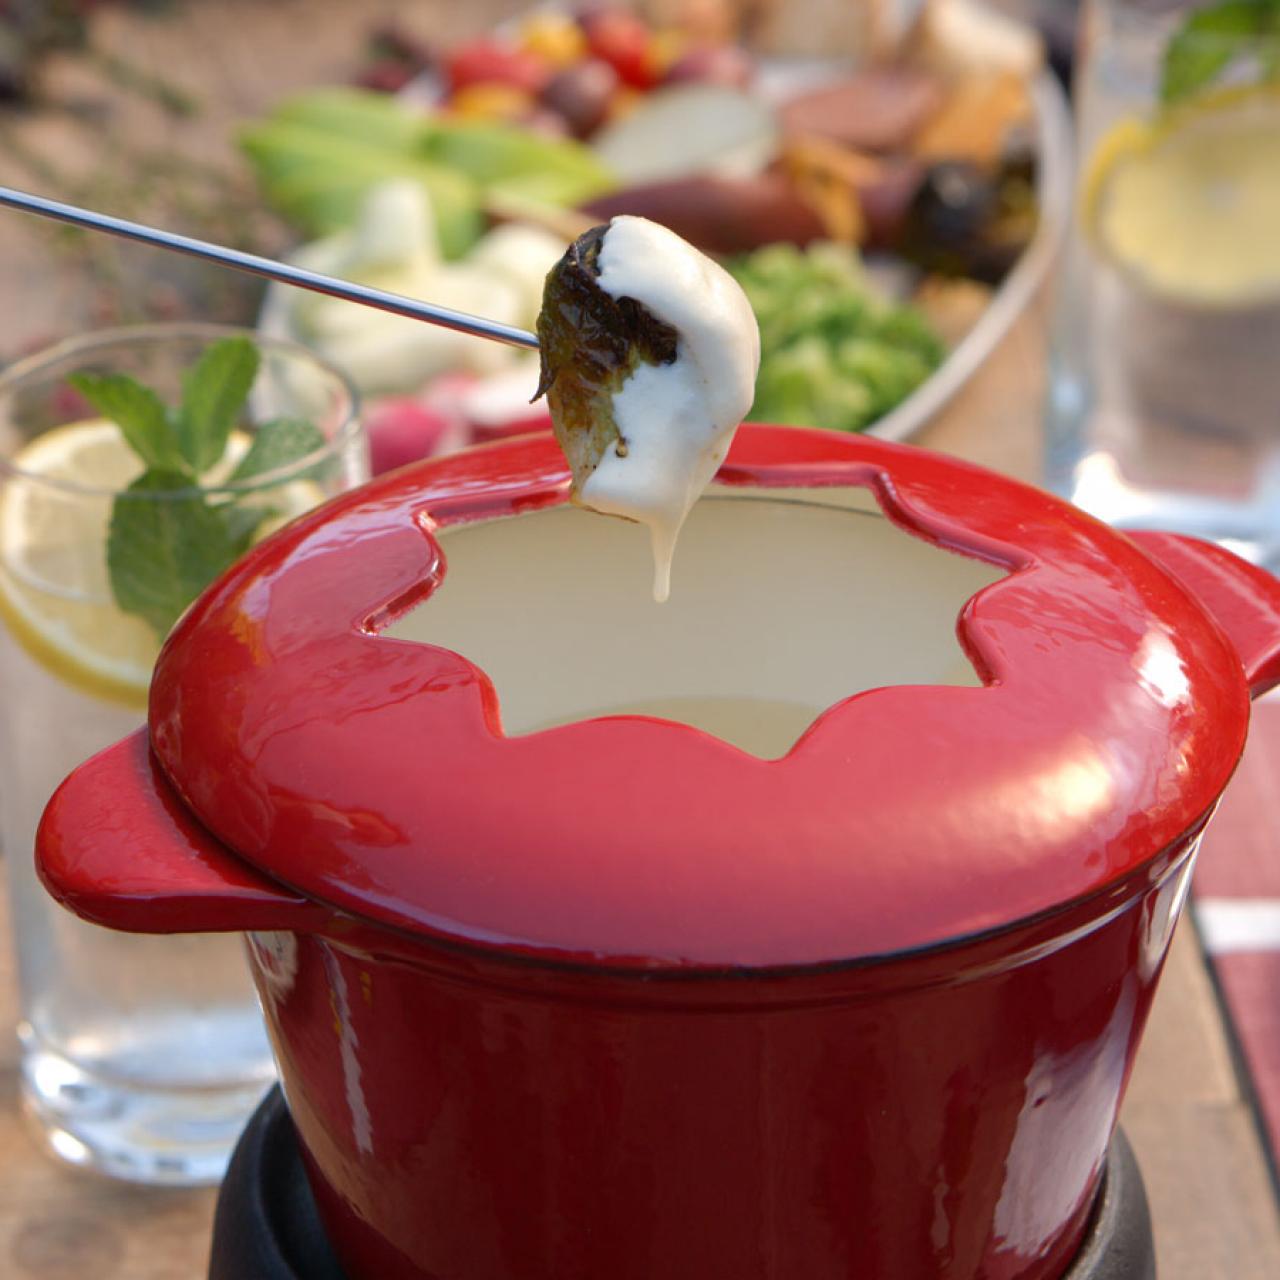 https://food.fnr.sndimg.com/content/dam/images/food/fullset/2021/05/28/VB1205_Four-Cheese-Fondue-with-Assorted-Dippers_s4x3.jpg.rend.hgtvcom.1280.1280.suffix/1622209138559.jpeg